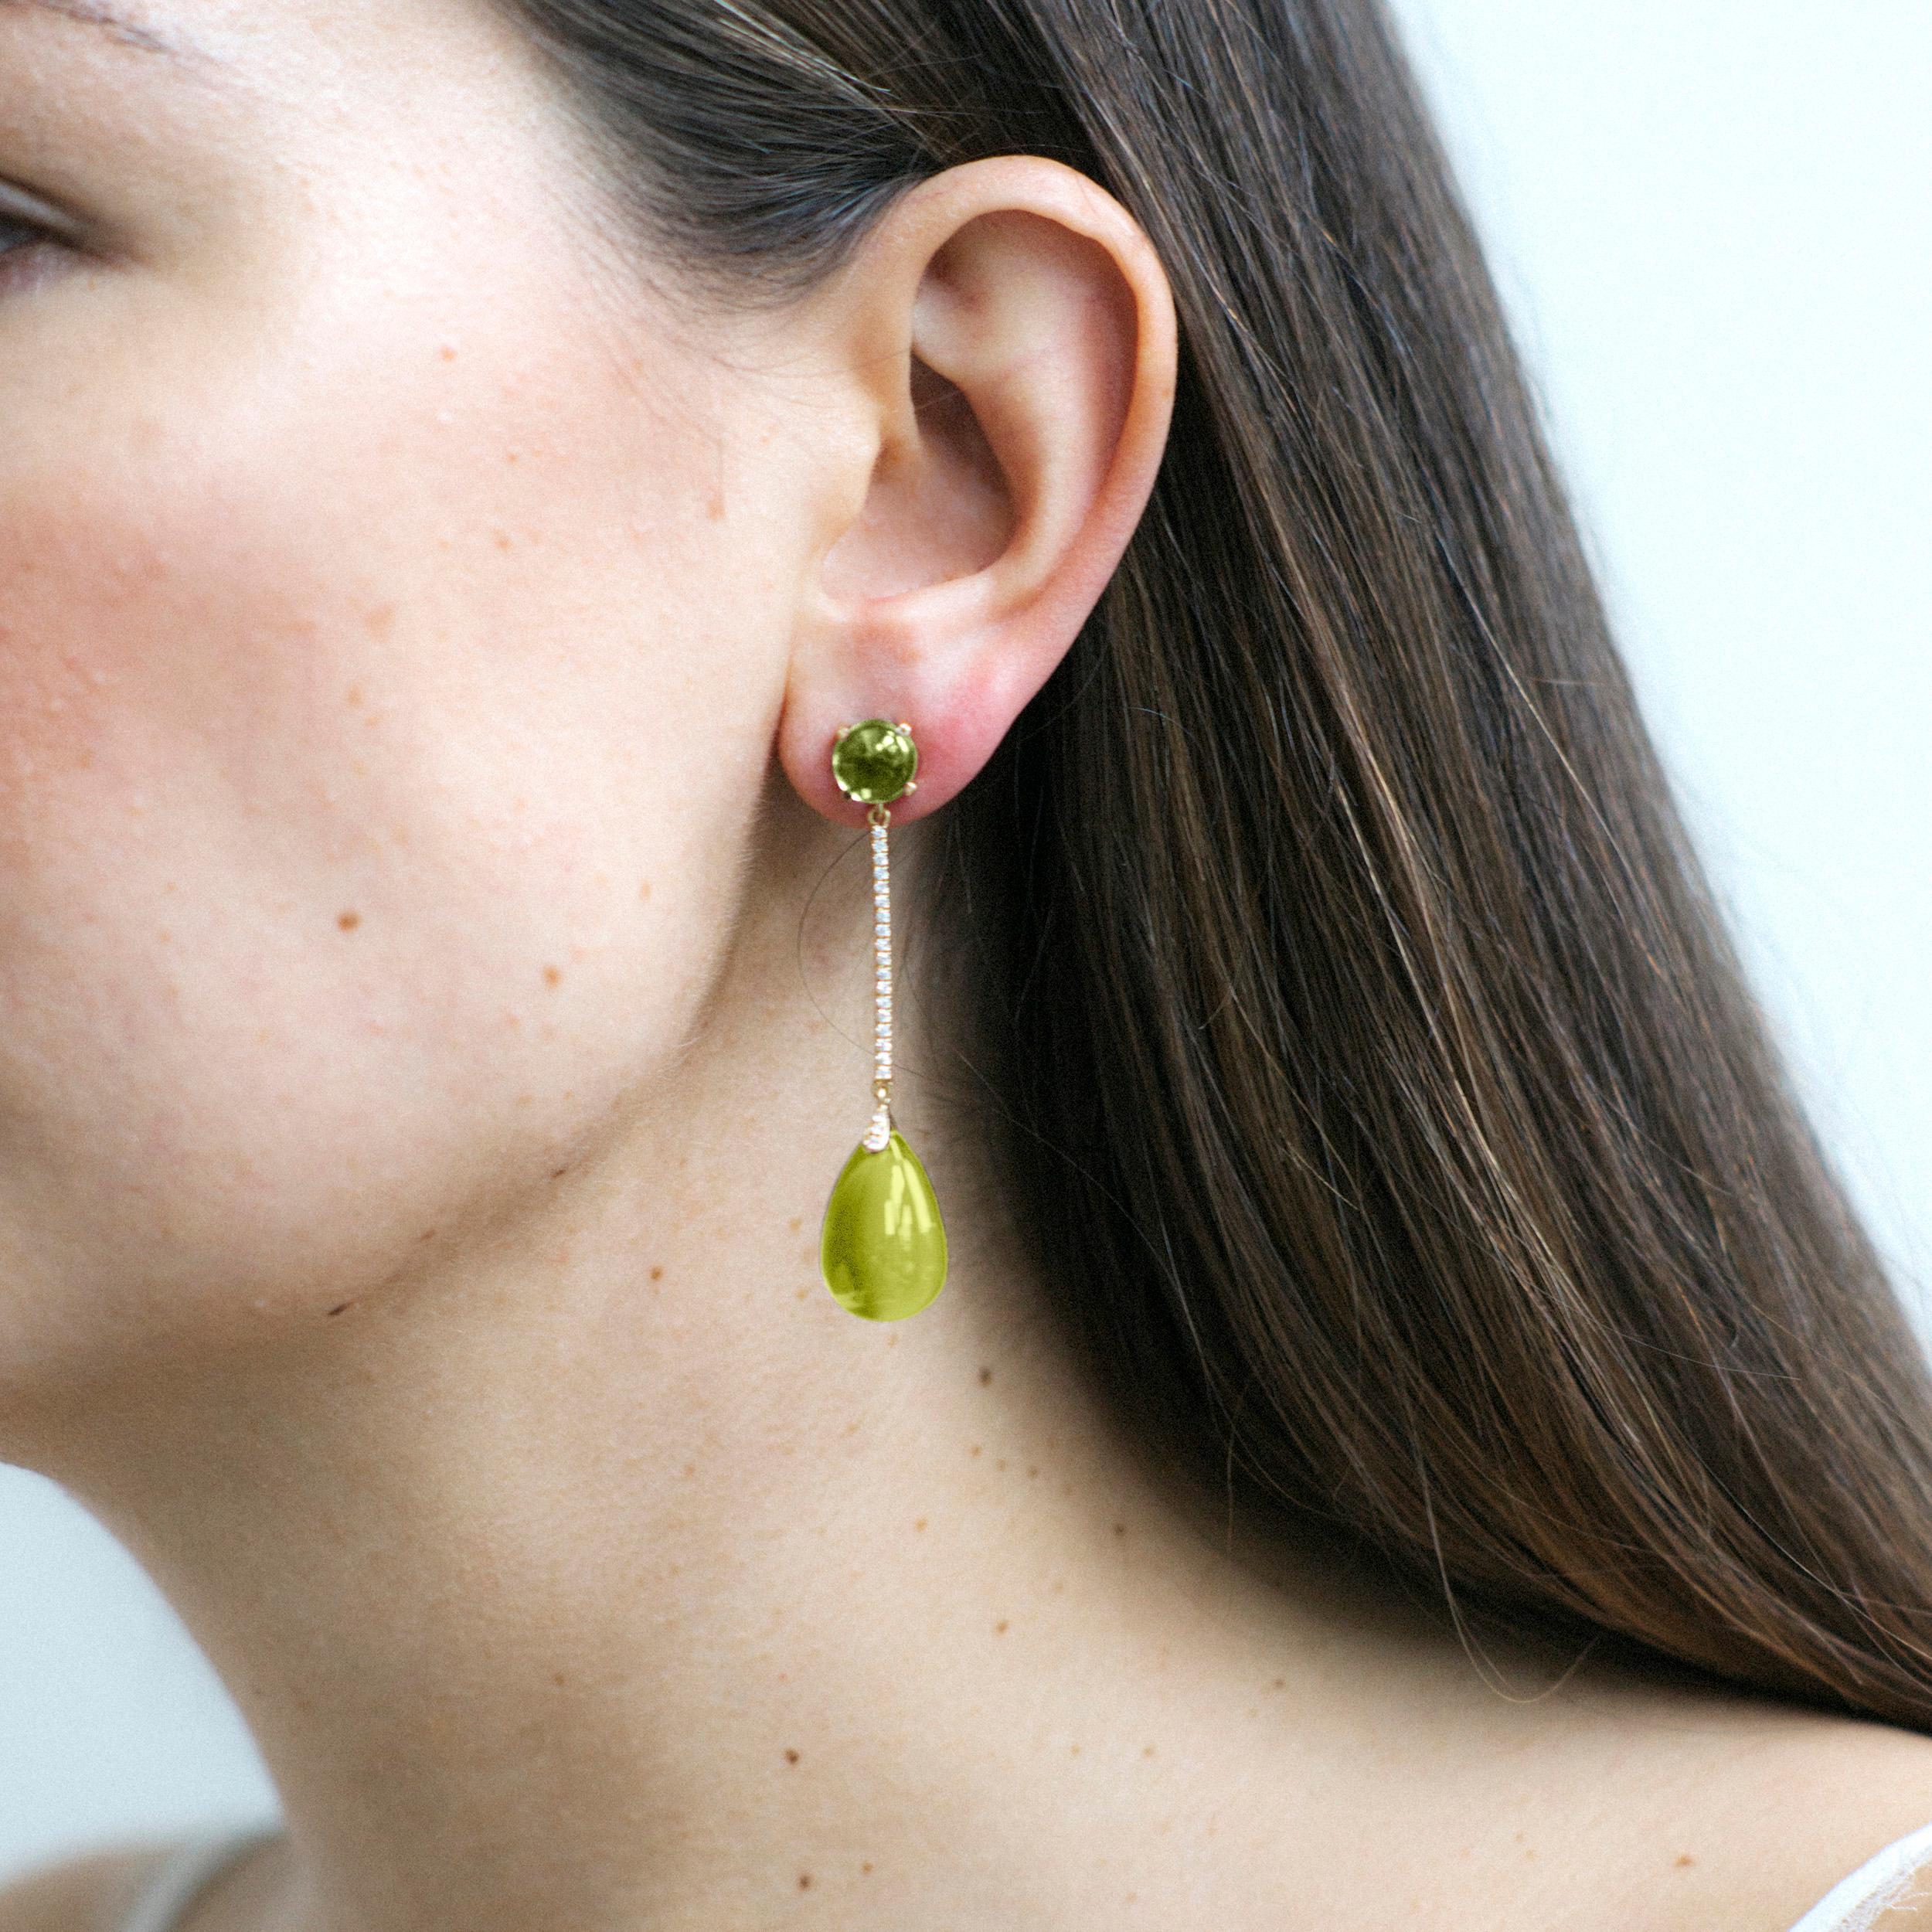 (Please allow 2-4 weeks for this item to be delivered)

Lemon Quartz & Peridot Long Drop Earrings with Diamonds in 18K Yellow Gold, from 'Naughty' Collection

Stone Size: 19 x 12 mm & 8 mm 

Diamonds: G-H / VS, Approx Wt: 0.28 Cts